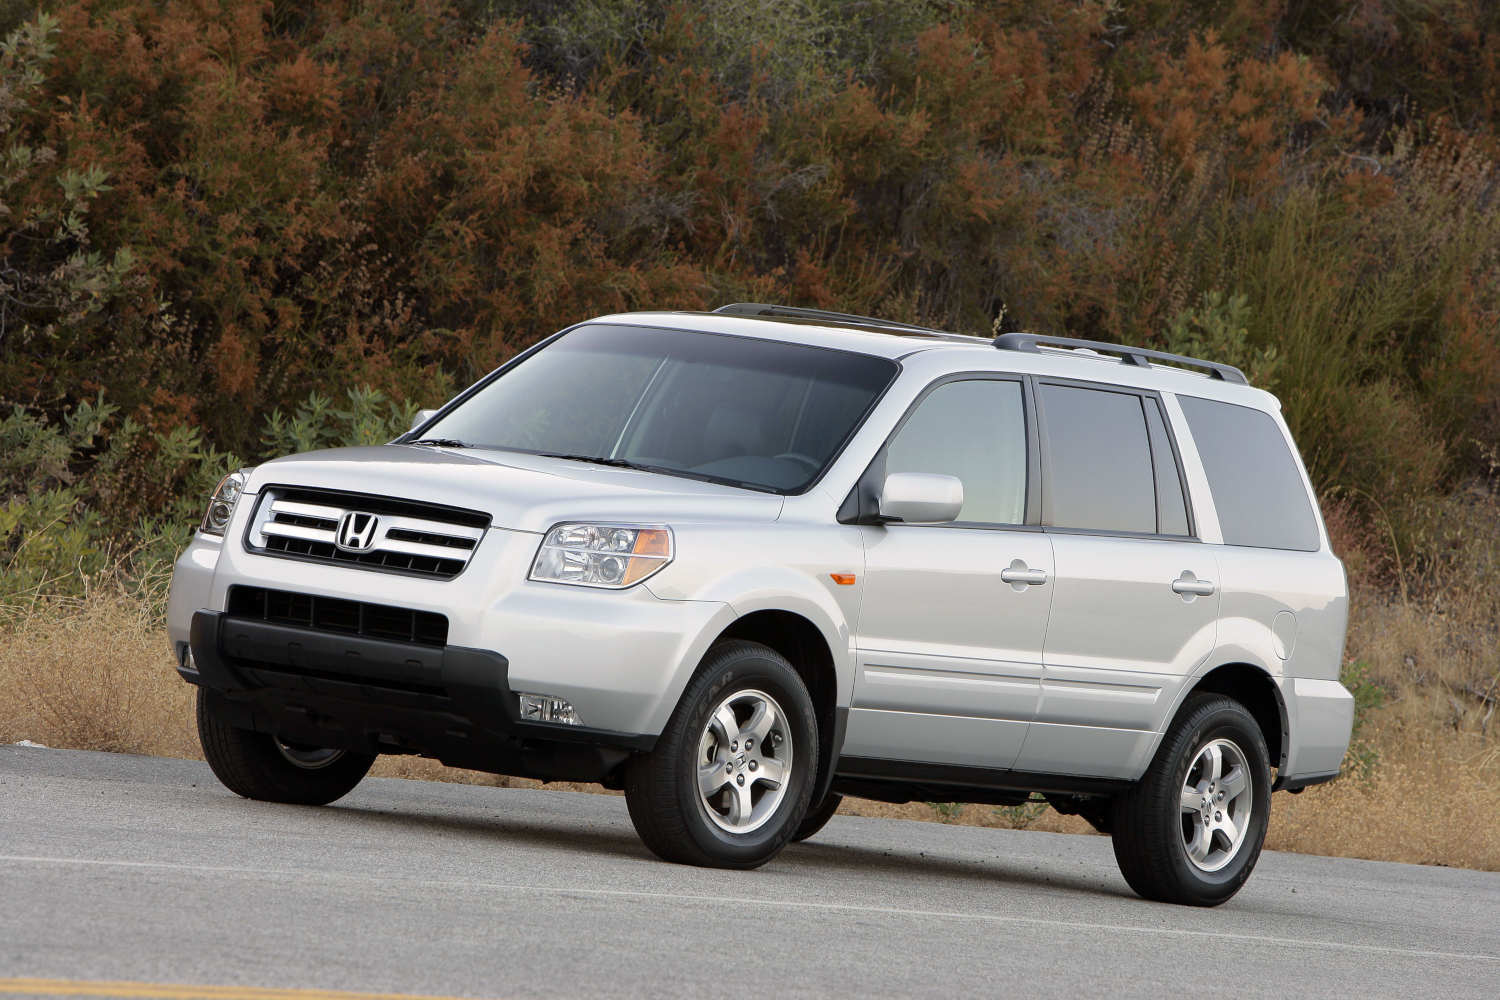 The Honda Pilot SUV is a reliable option